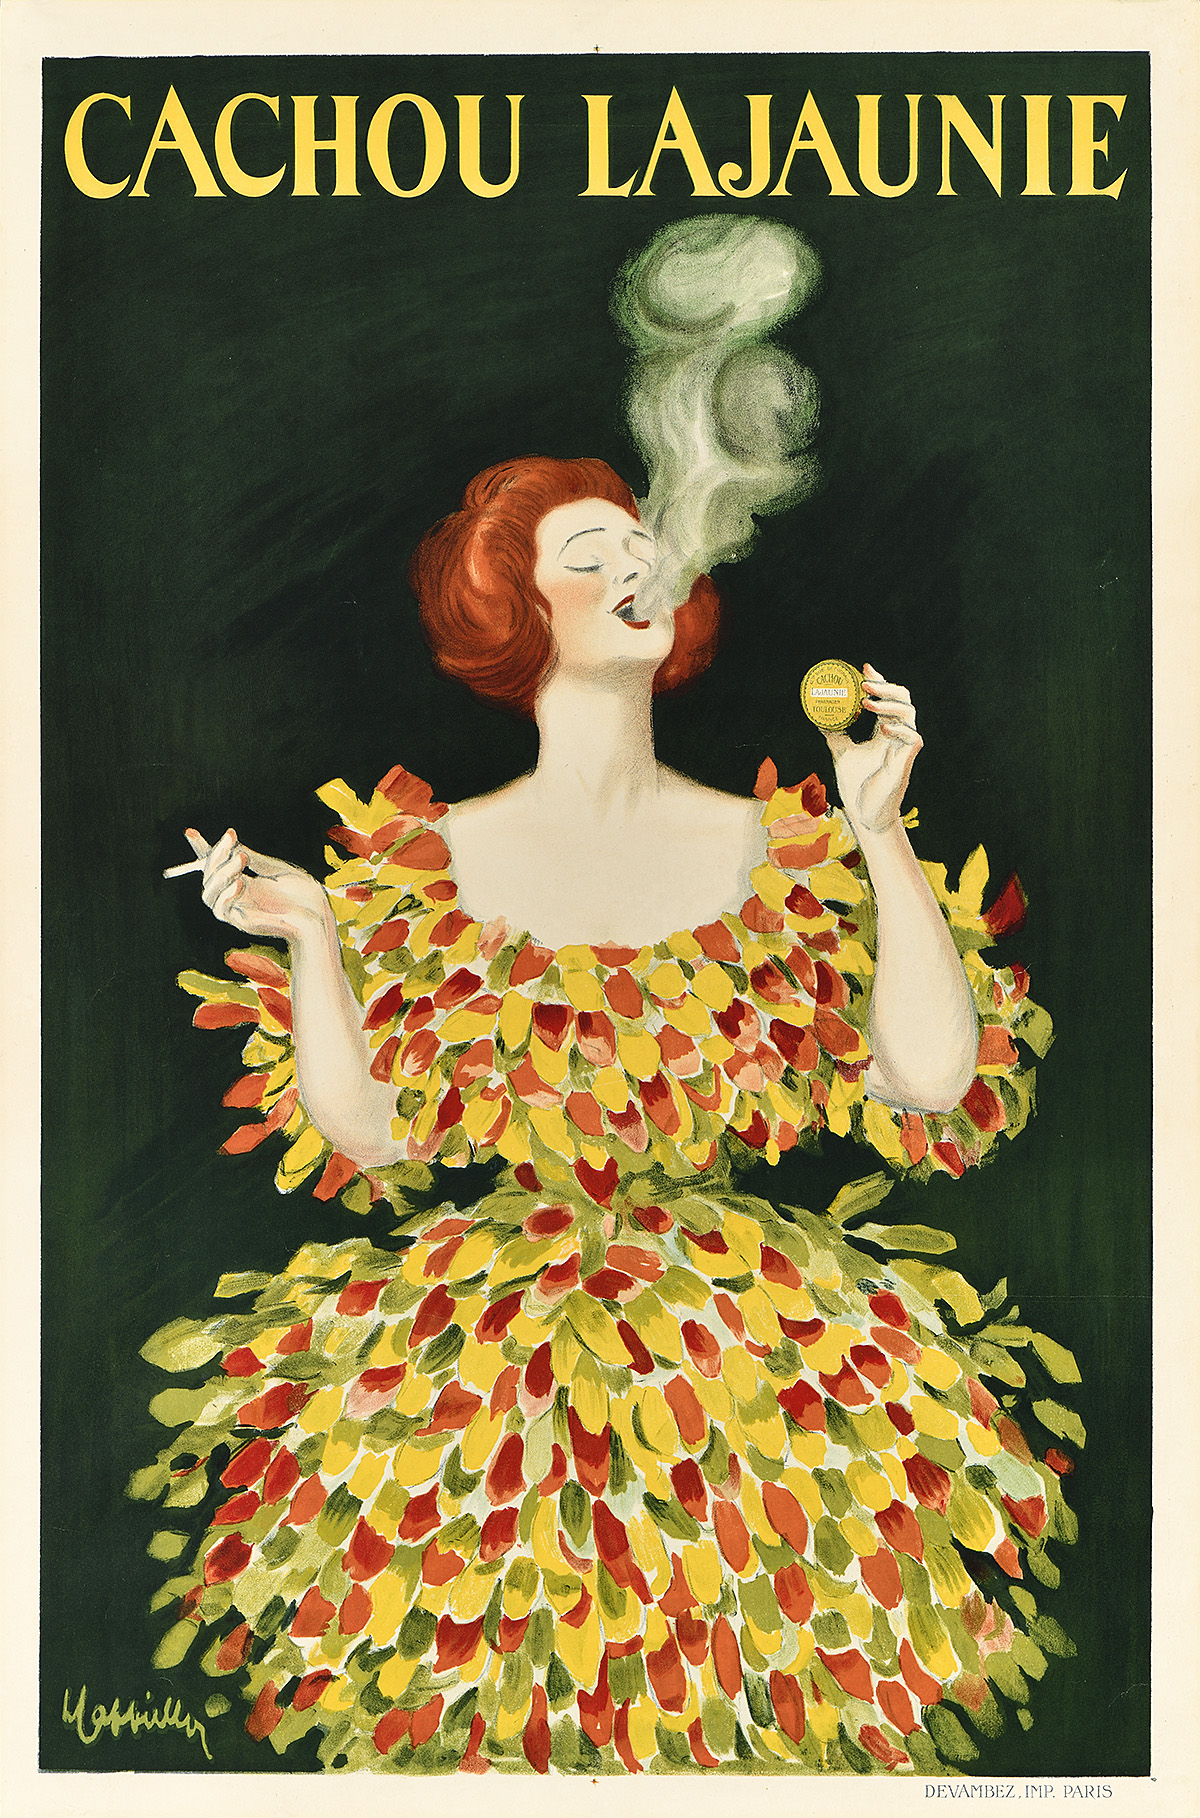 Poster of a woman in a feathered dress smoking and eating mints.